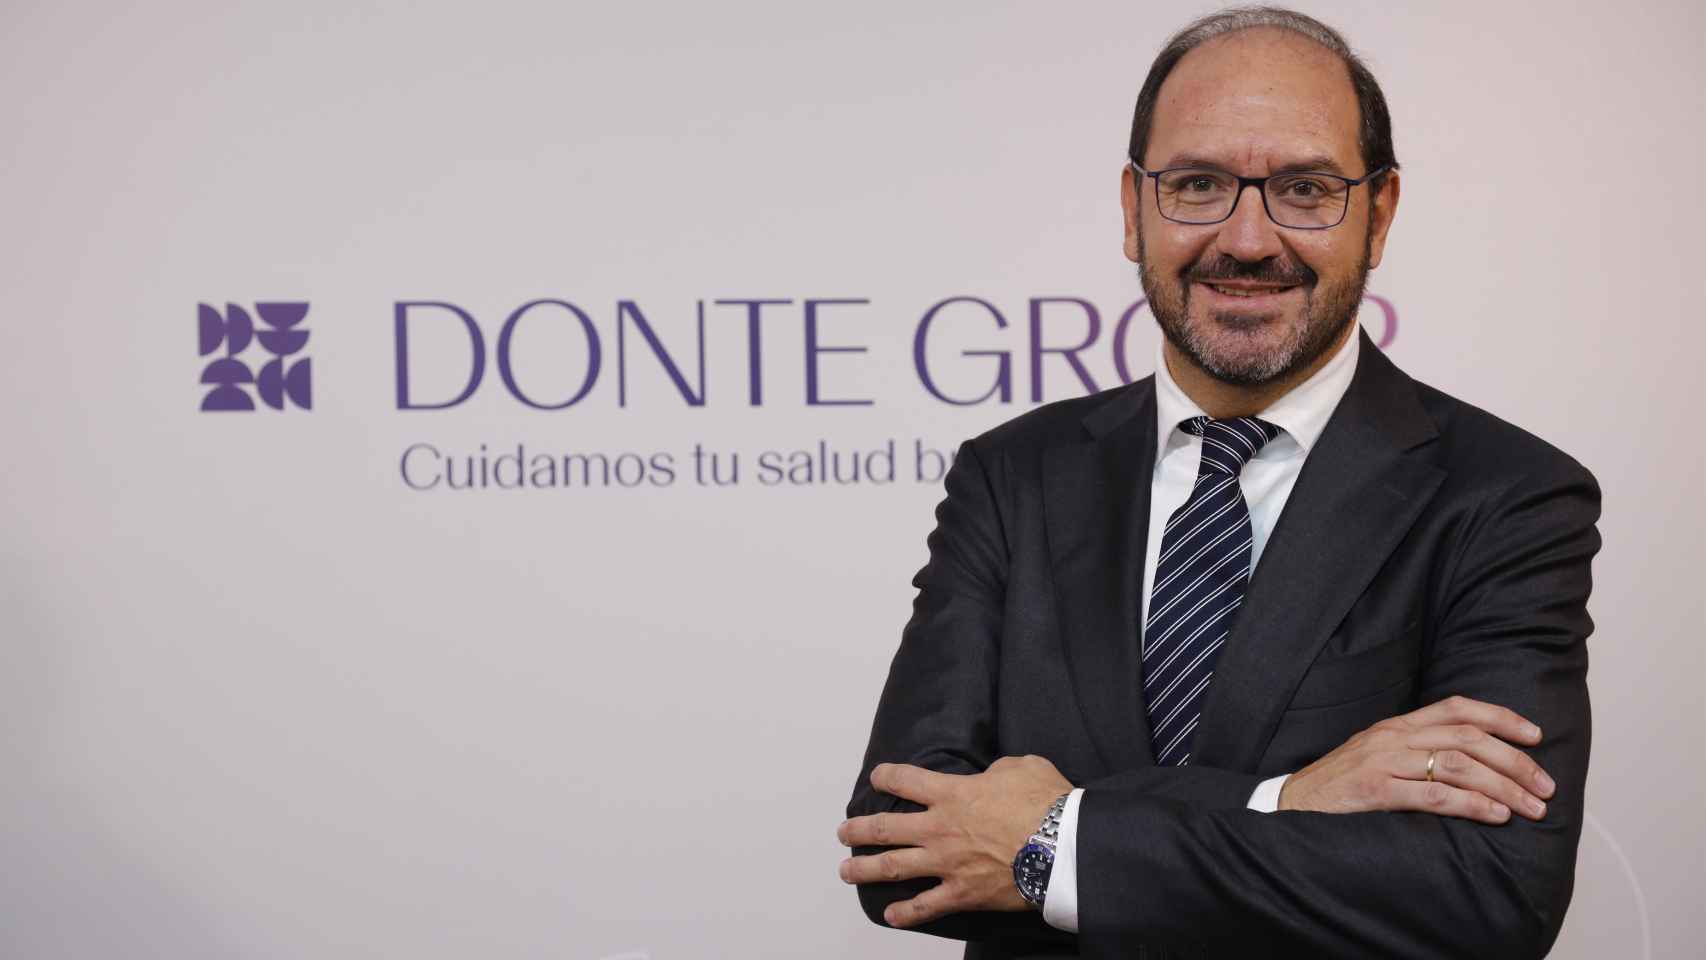 The Ceo Of Donte Group, Javier Martín.